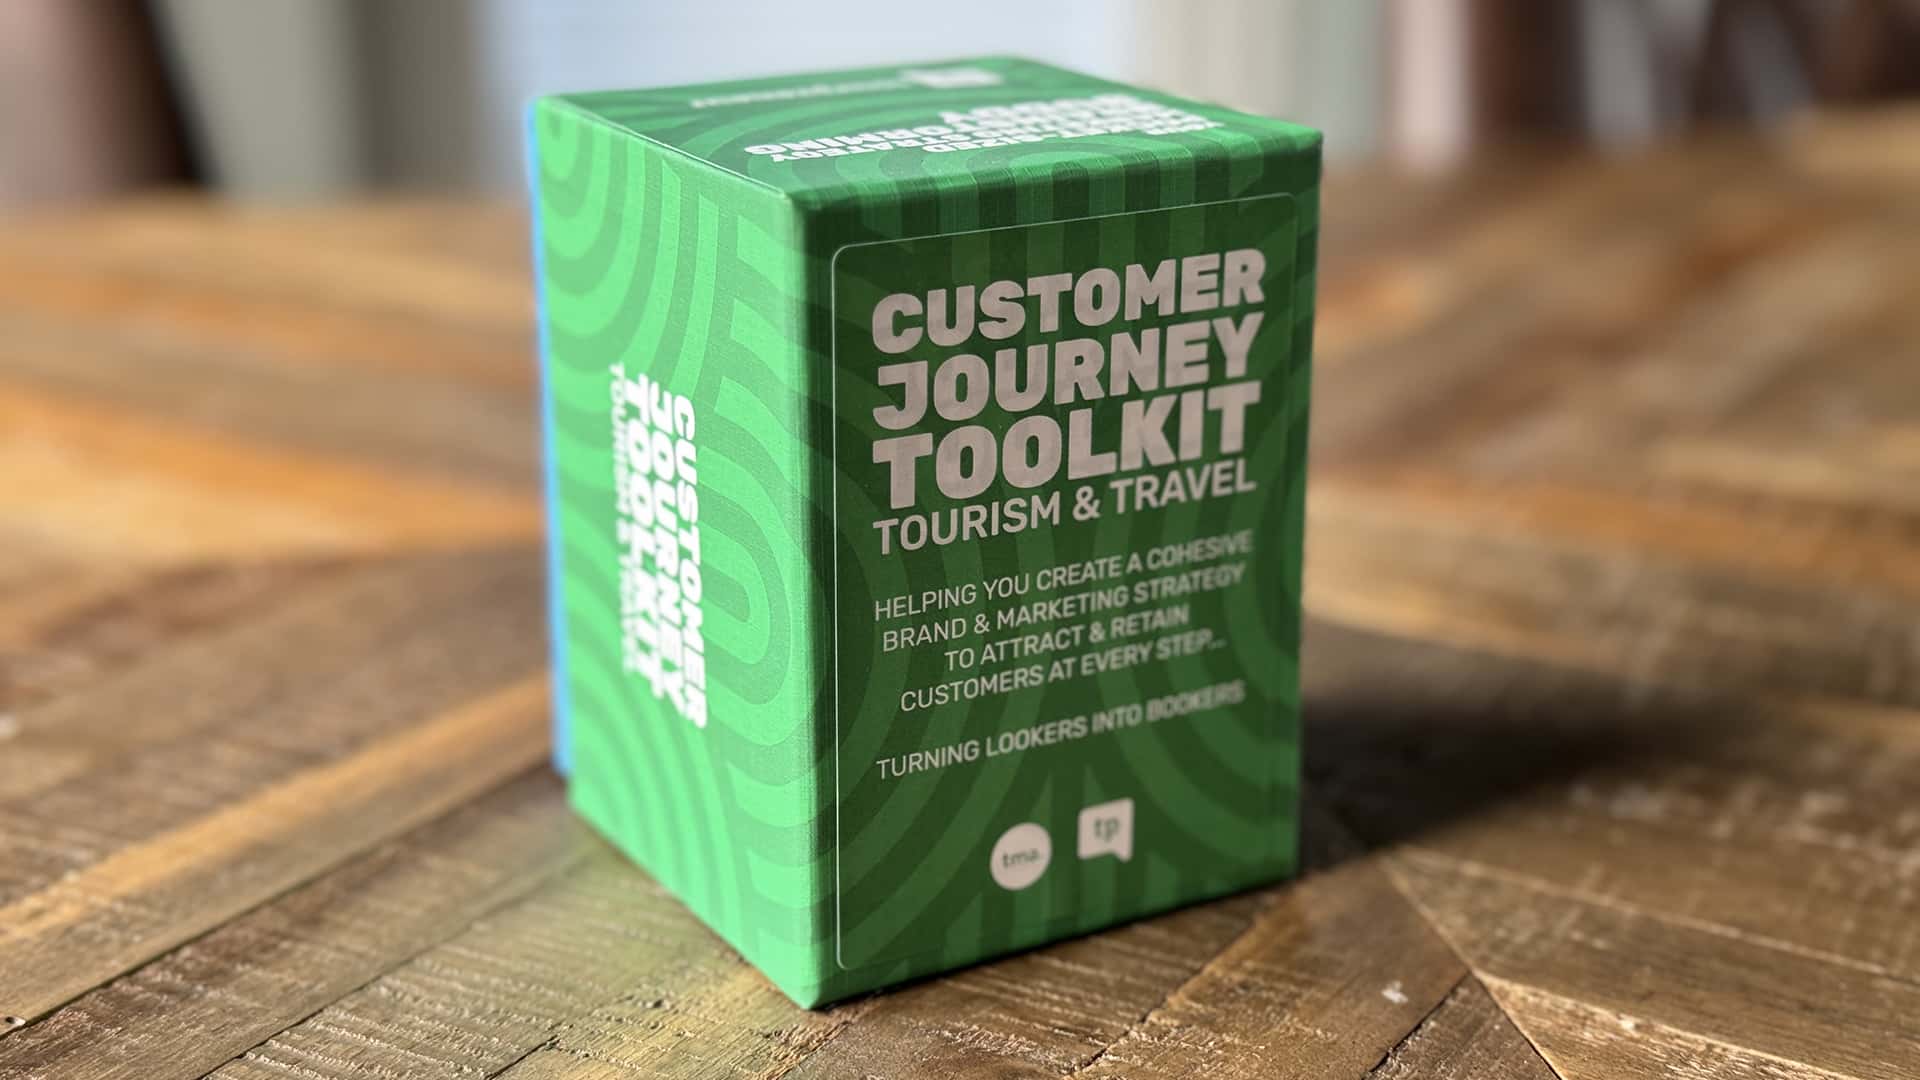 A green box labeled "Customer Journey Toolkit: Tourism & Travel," sits on a wooden surface. The box is designed to help with brand and marketing strategy to attract and retain customers.